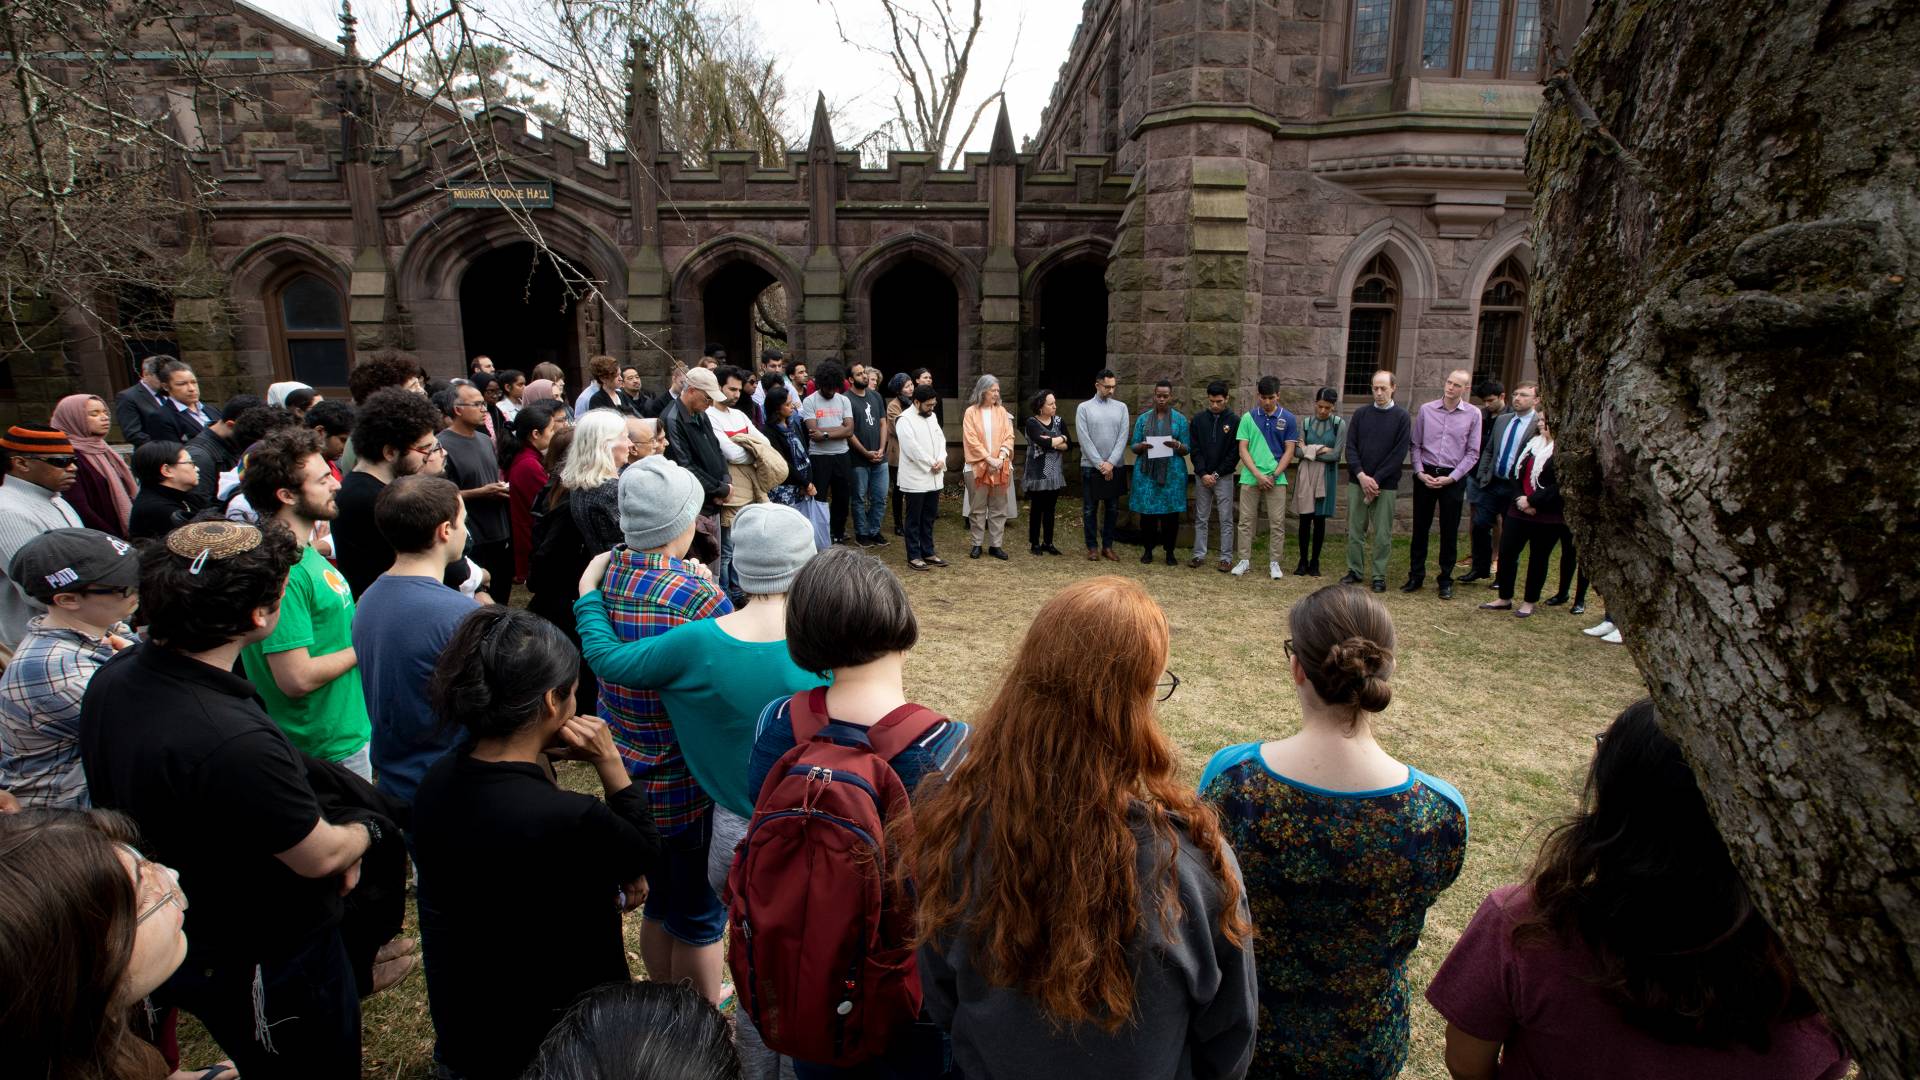 Members of the University community gather for solace after the New Zealand Mosque shootings